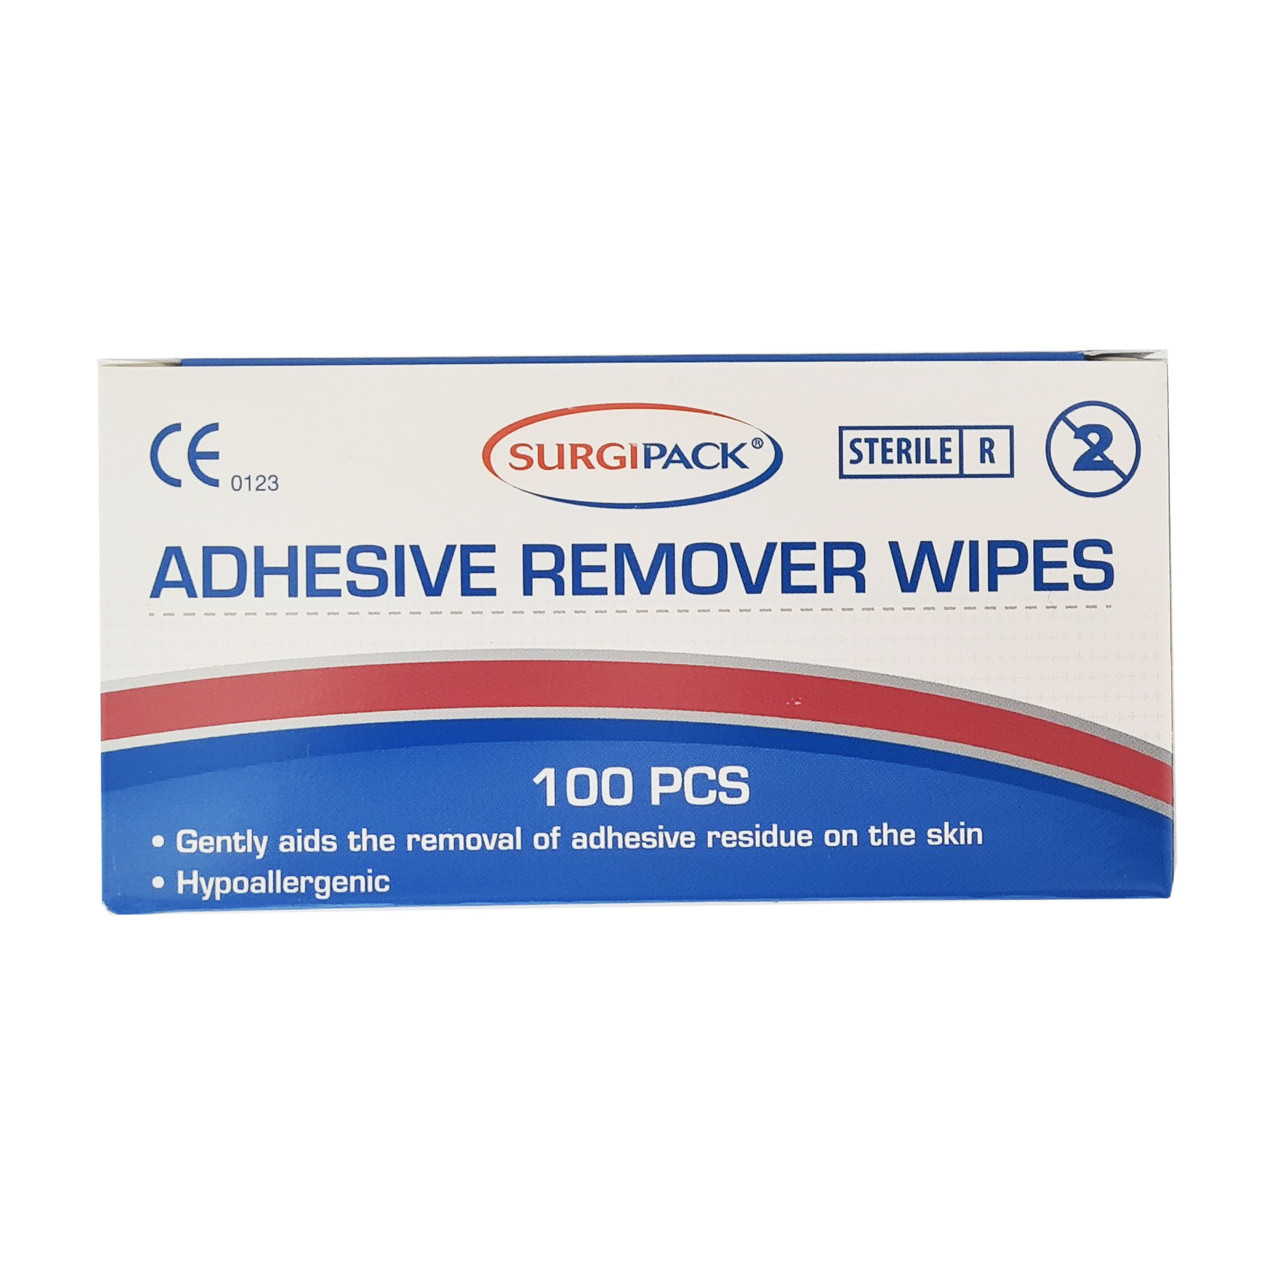 Niltac (Sensi-Care) Adhesive Remover Wipes: VIDEO REVIEW